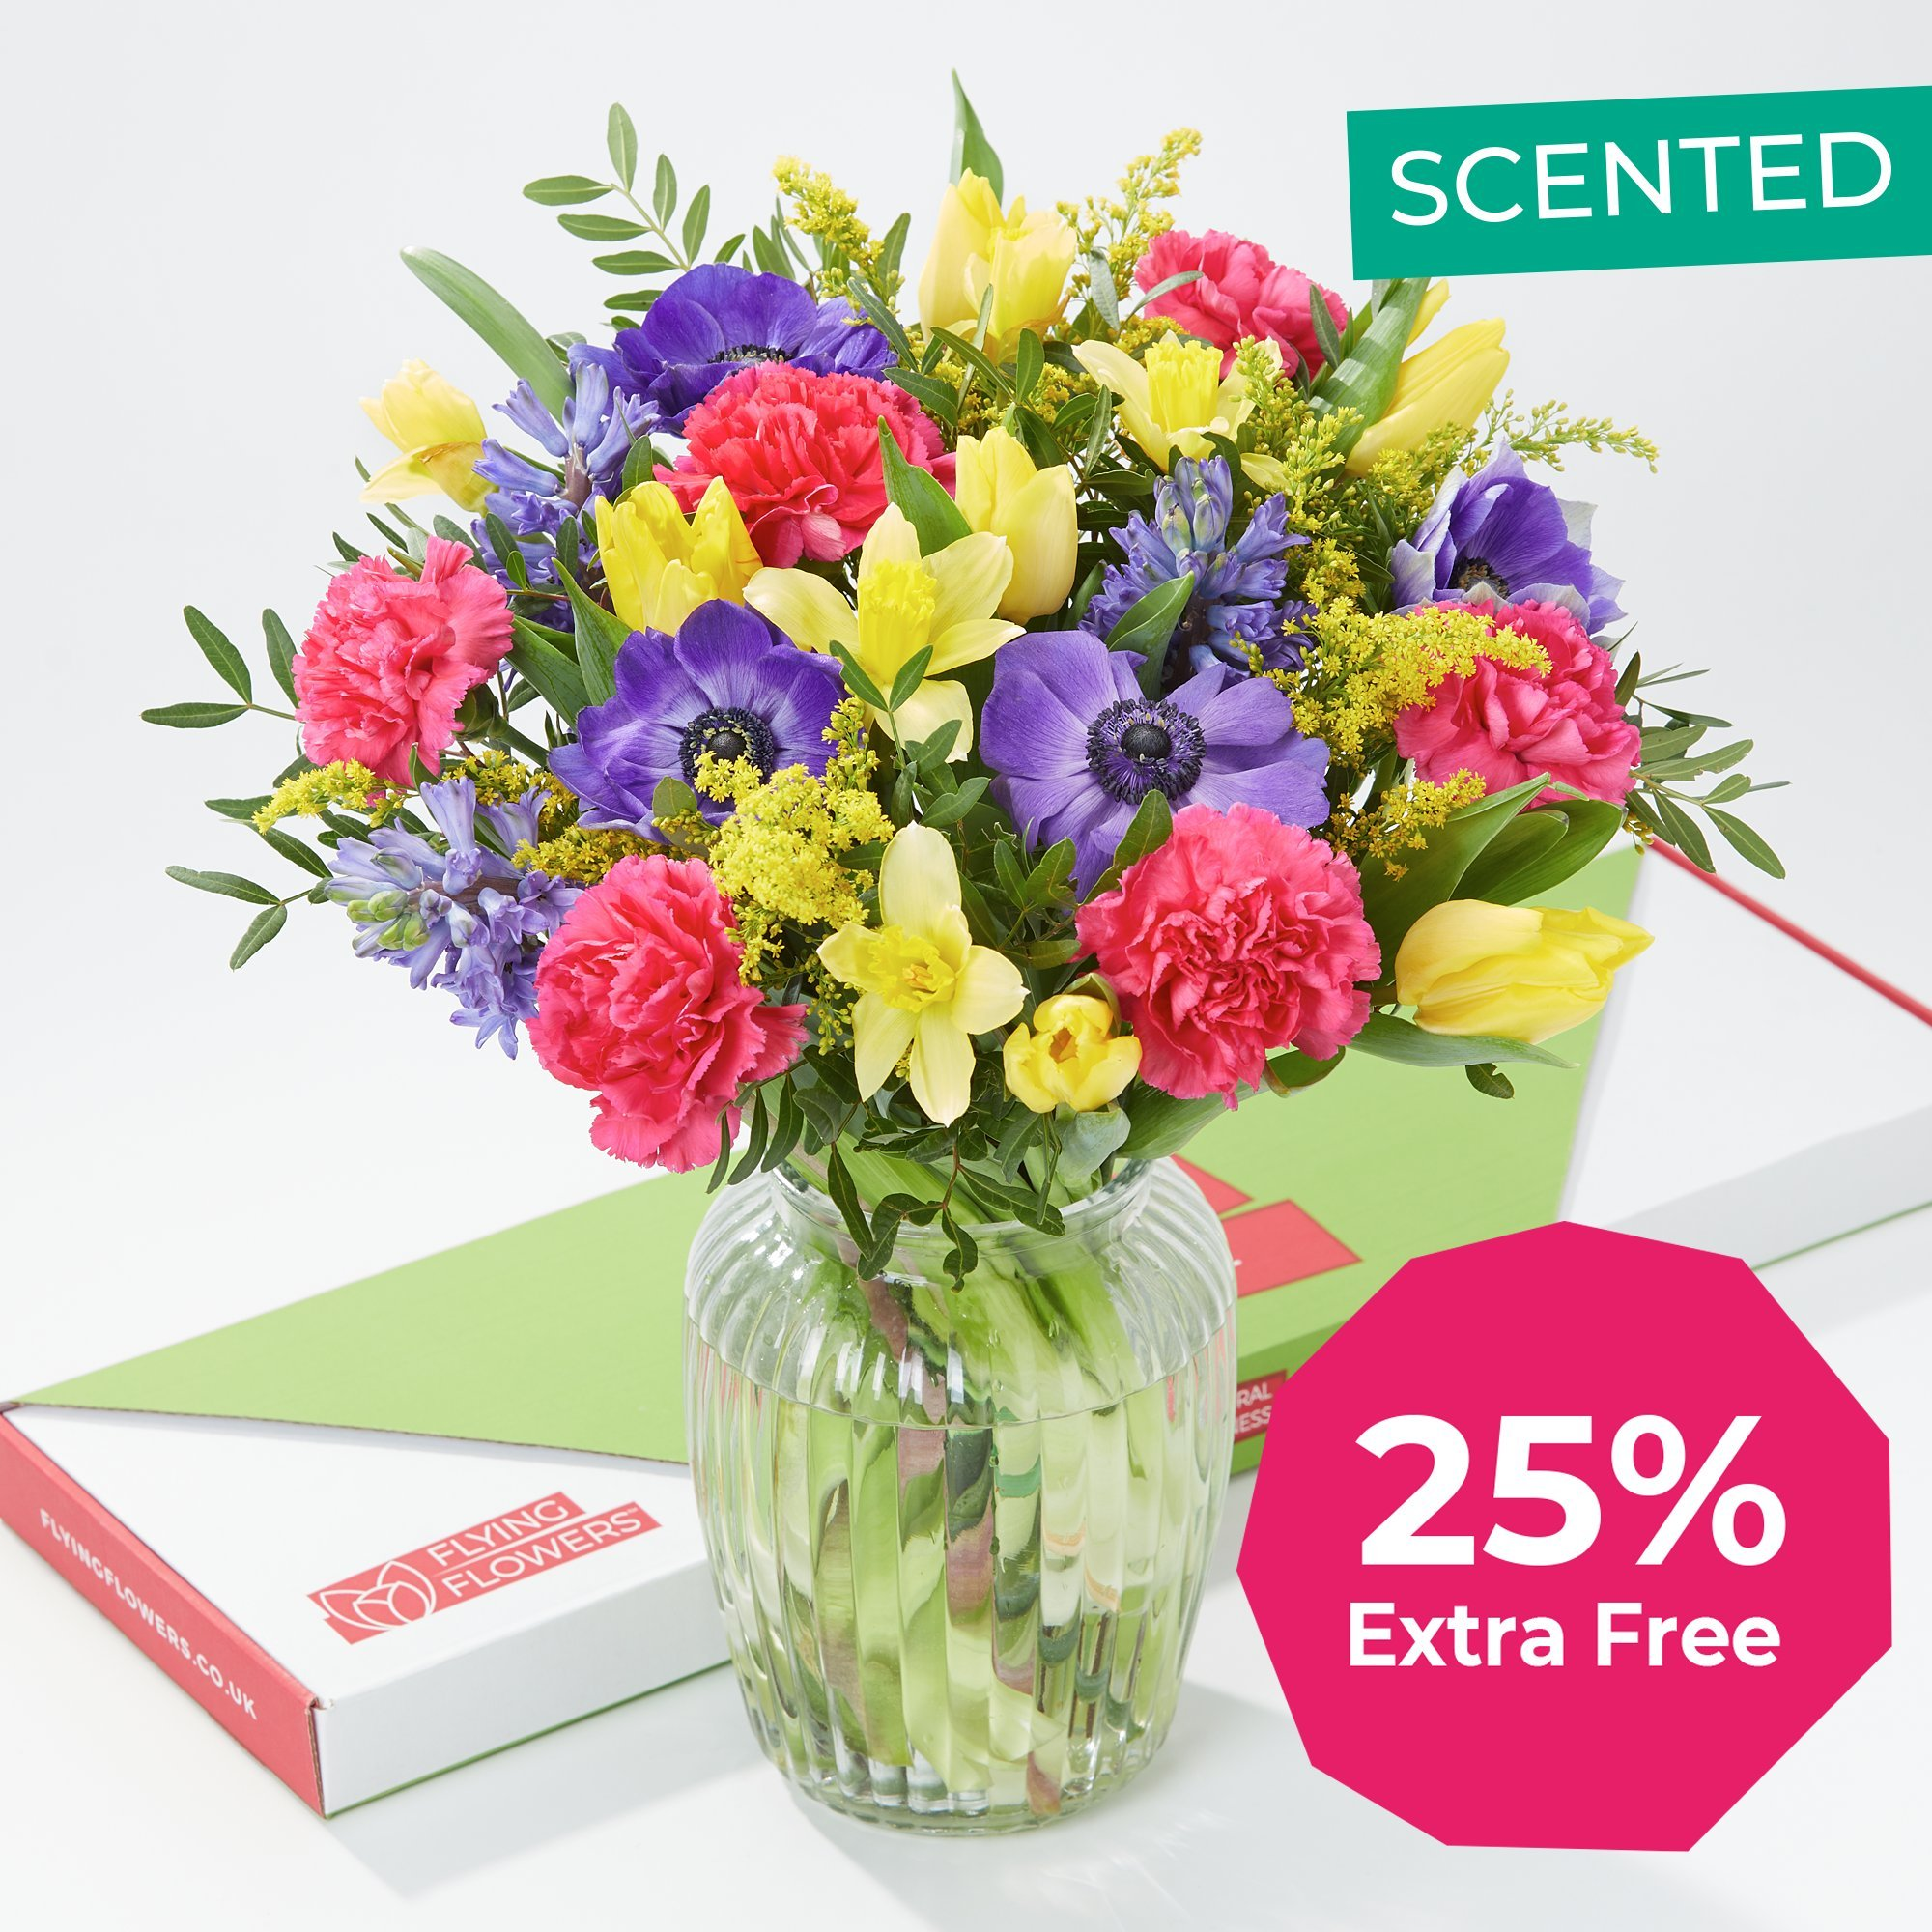 Scented Spring Letterbox - 25% Extra Free